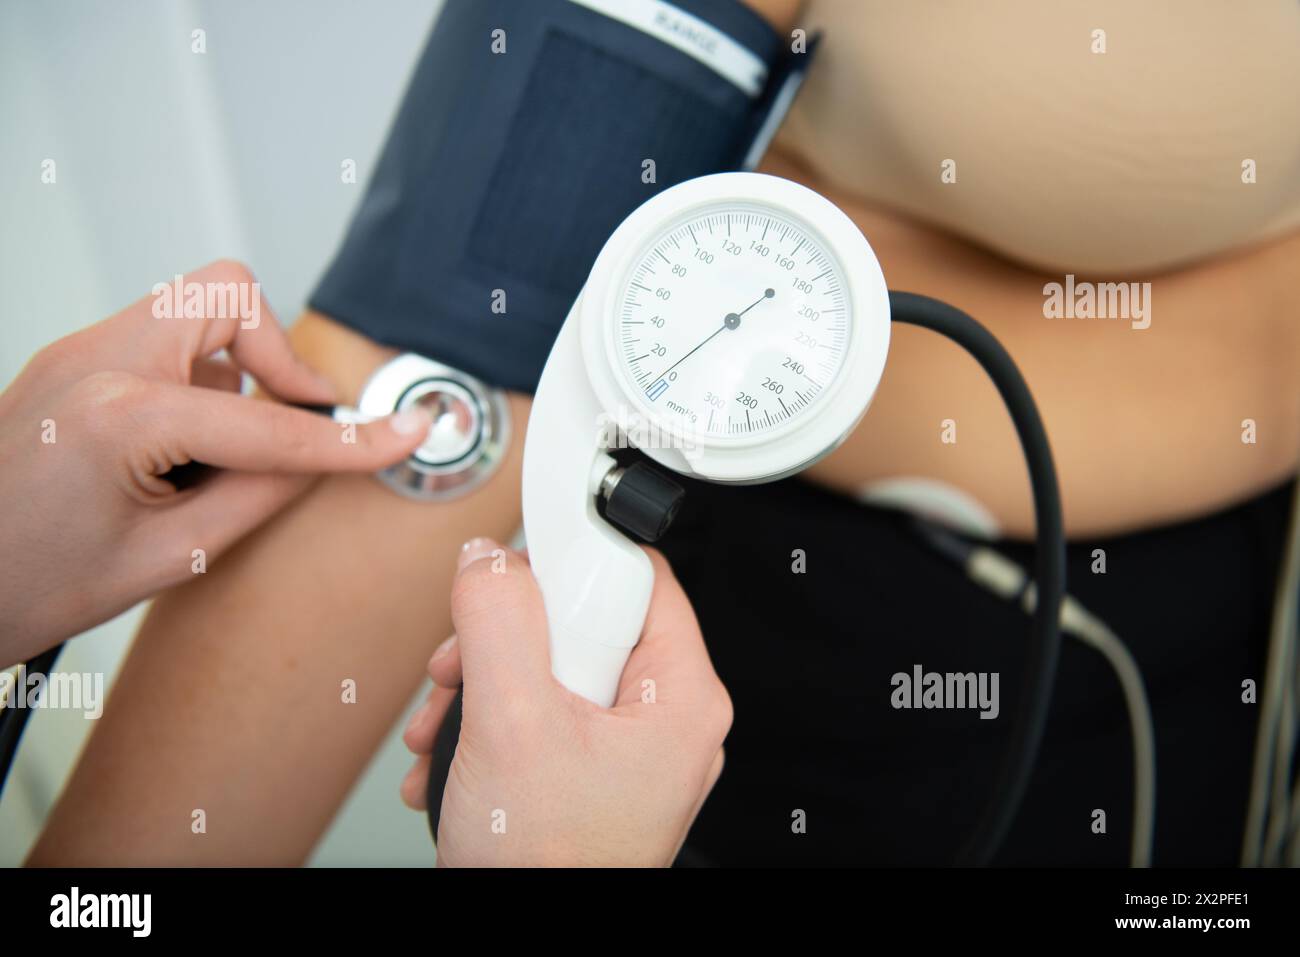 A healthcare professional administers a cardiology test with electrodes and blood pressure cuff. Stock Photo